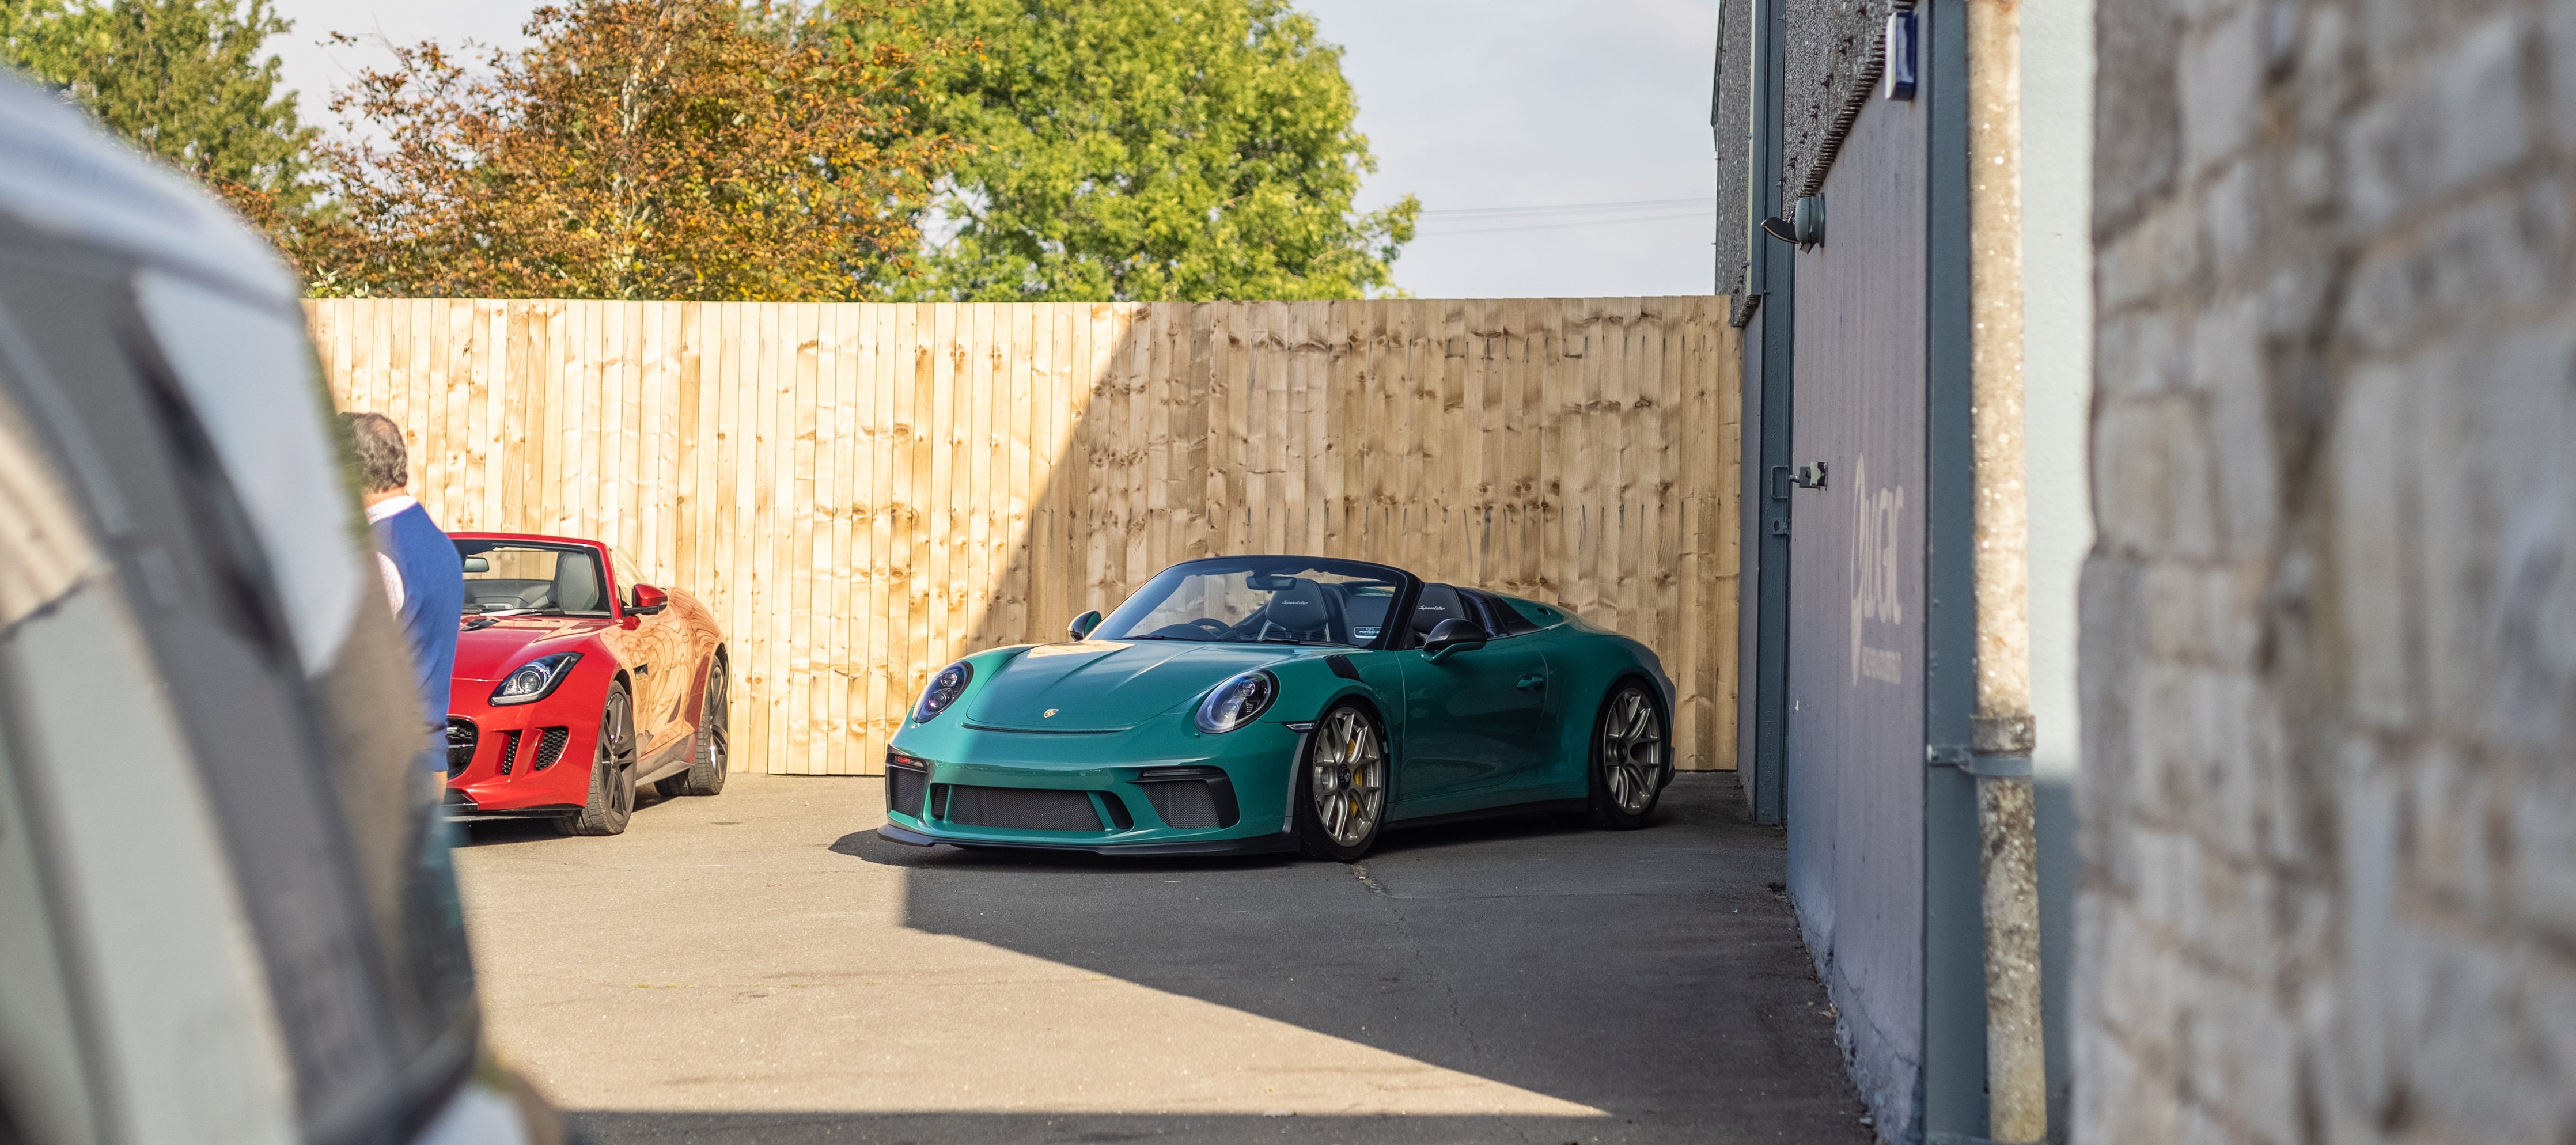 A PERFECT DAY WITH THE JCR SPEEDSTER - HENRY'S CAR BARN & C&M